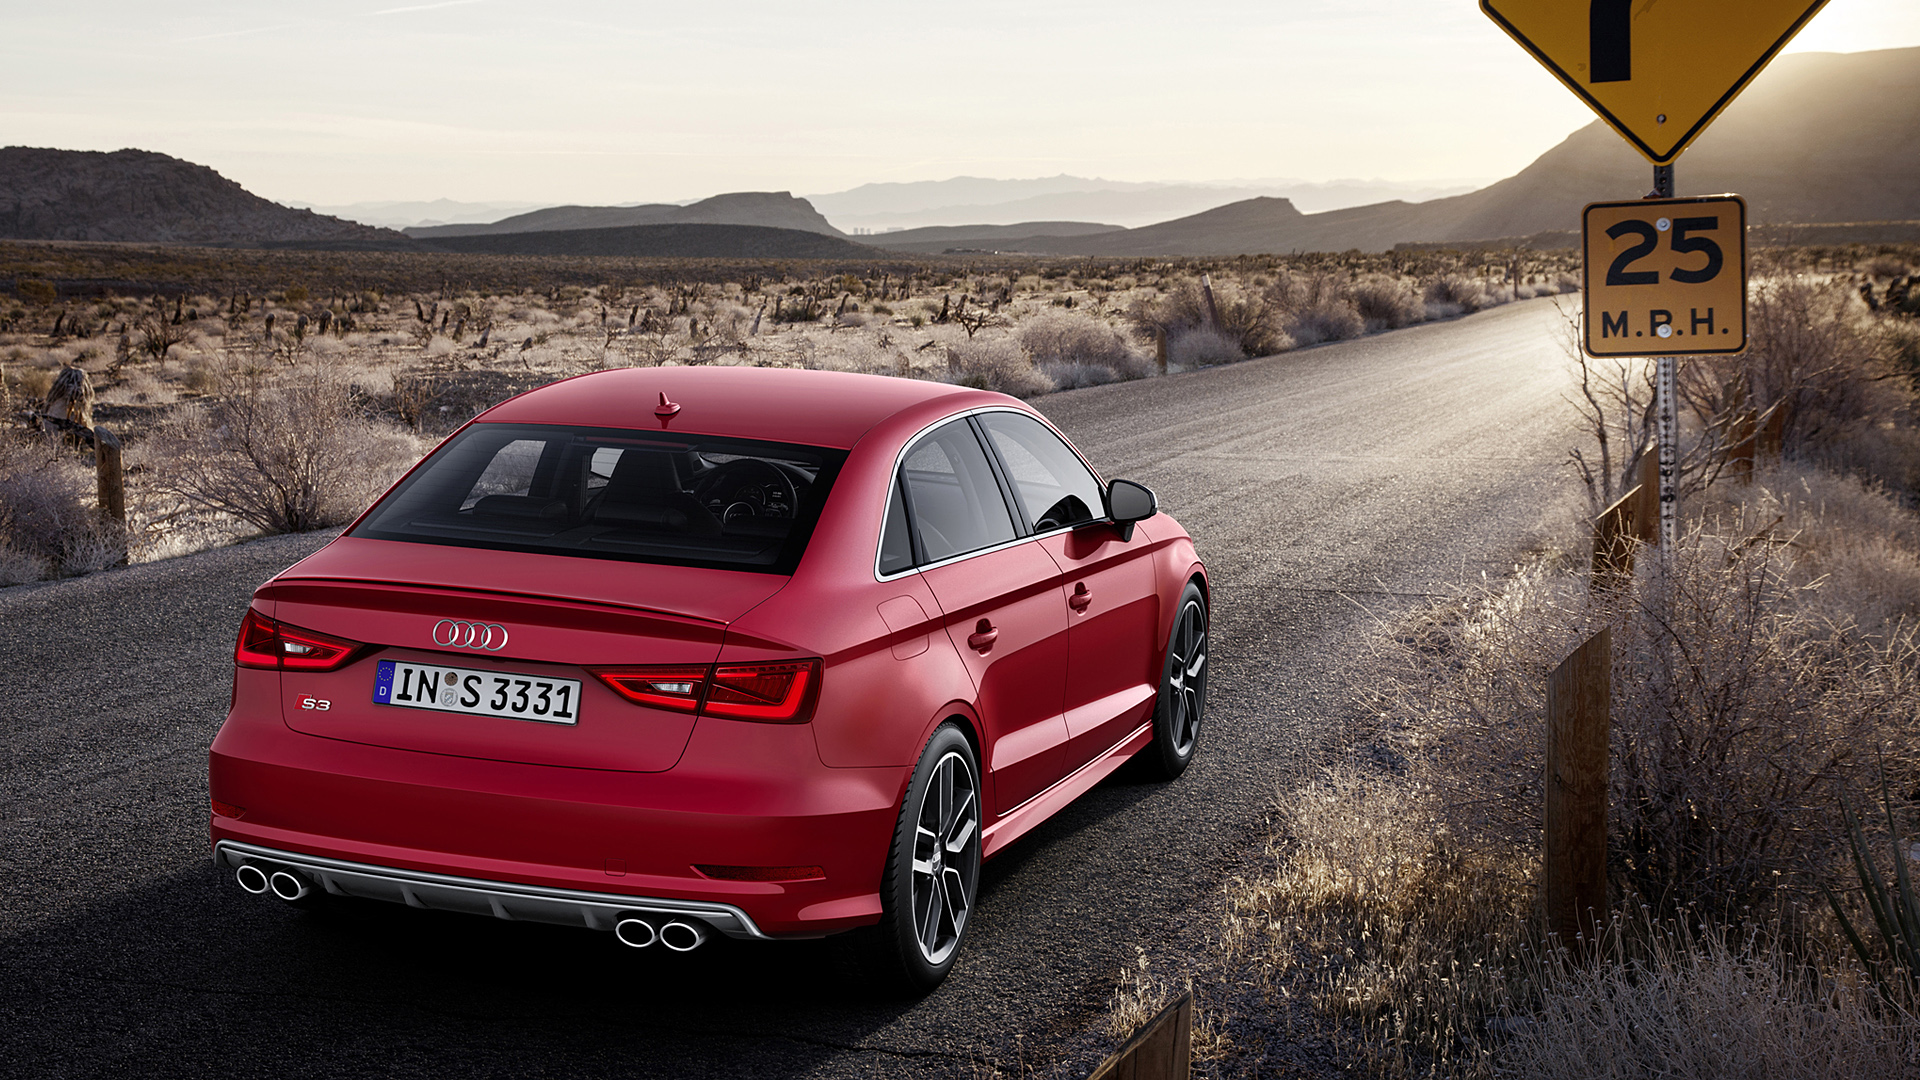 2015 Audi S3 Wallpapers HD Images   WSupercars 1920x1080